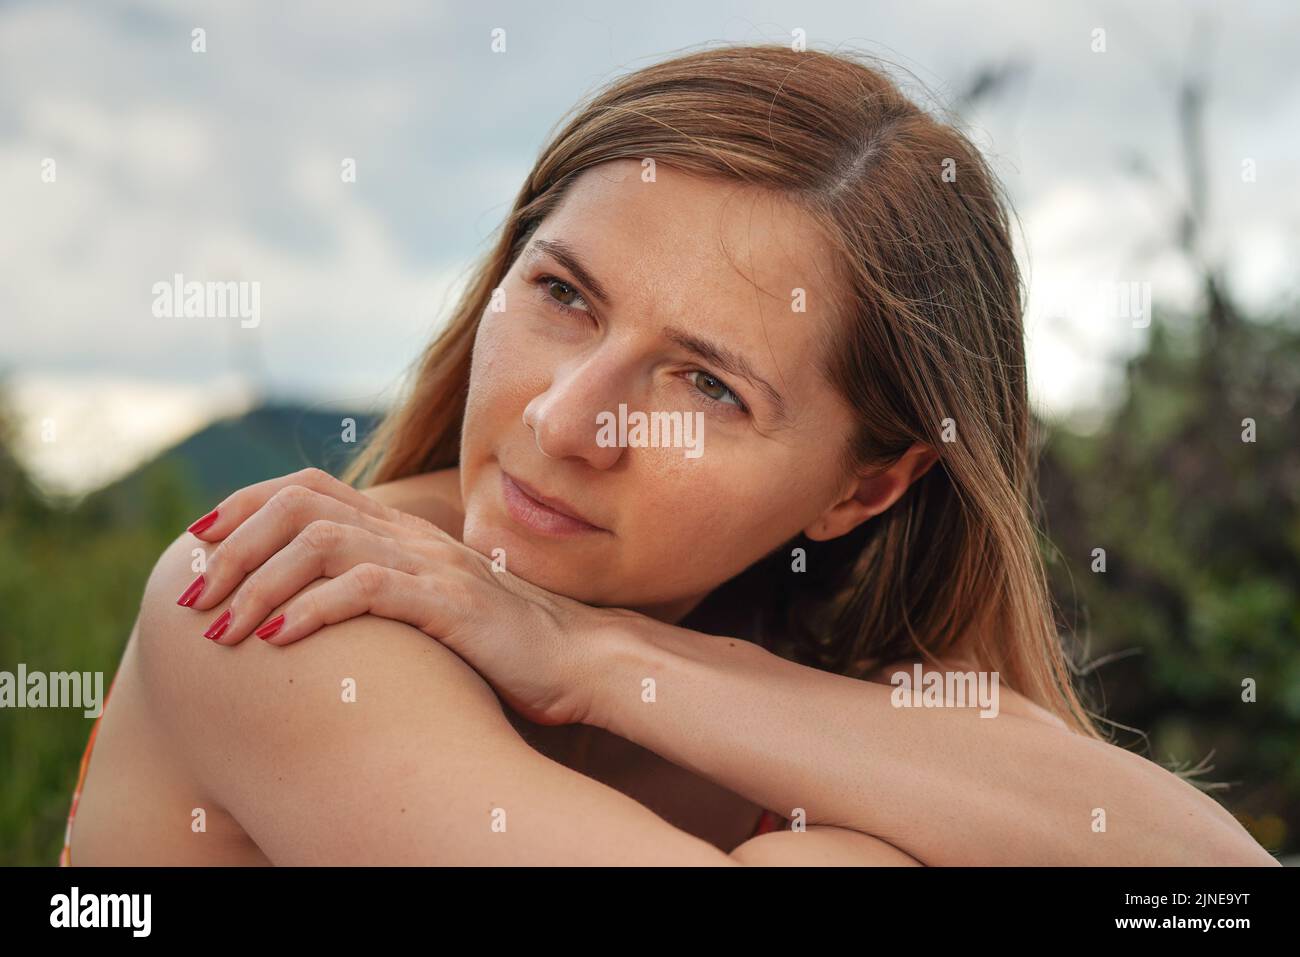 Young woman casual portrait - leaning on her palm and shoulder looking to side, closeup detail, blurred trees background Stock Photo